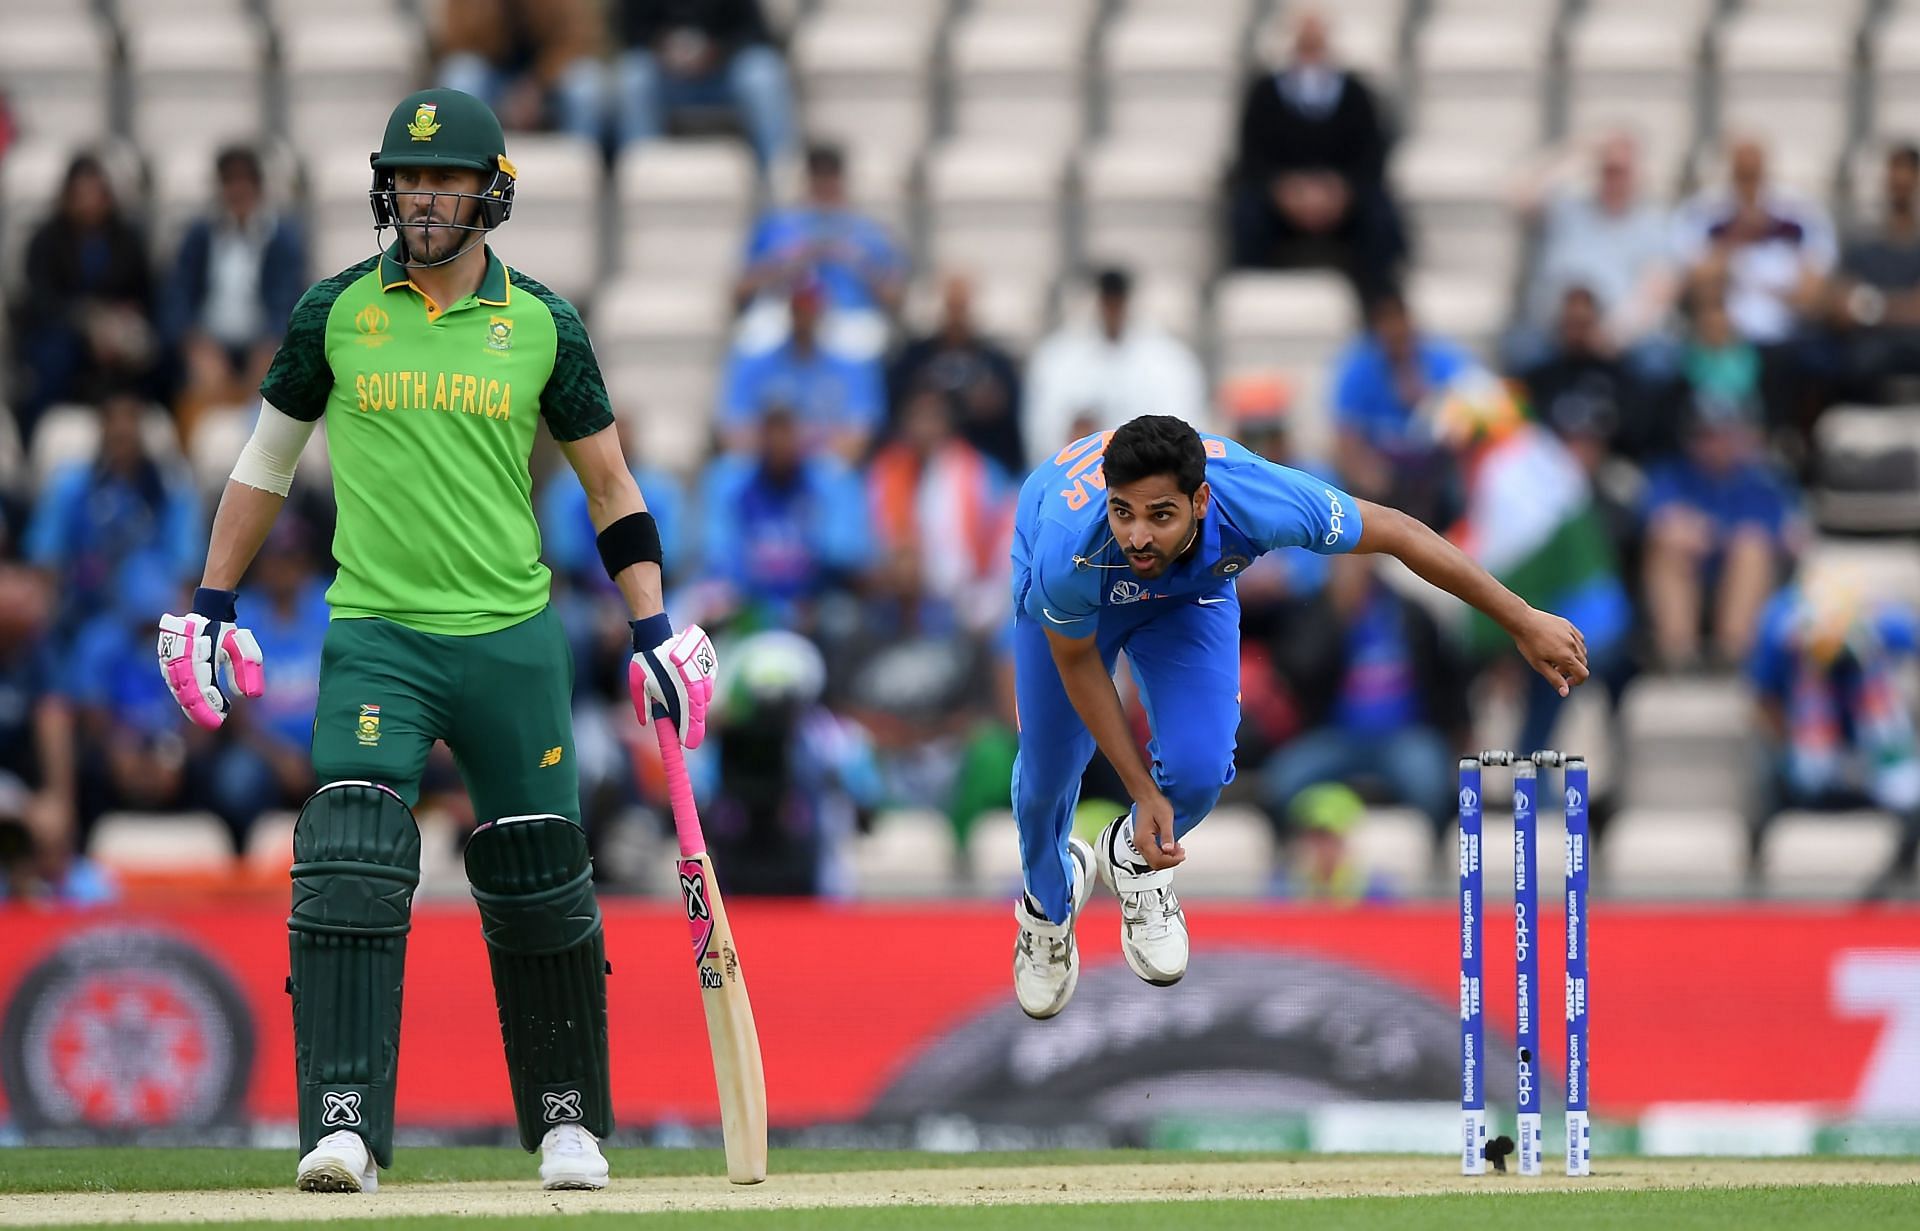 Bhuvneshwar Kumar was a key cog in the wheel for India at the ICC Cricket World Cup 2019.